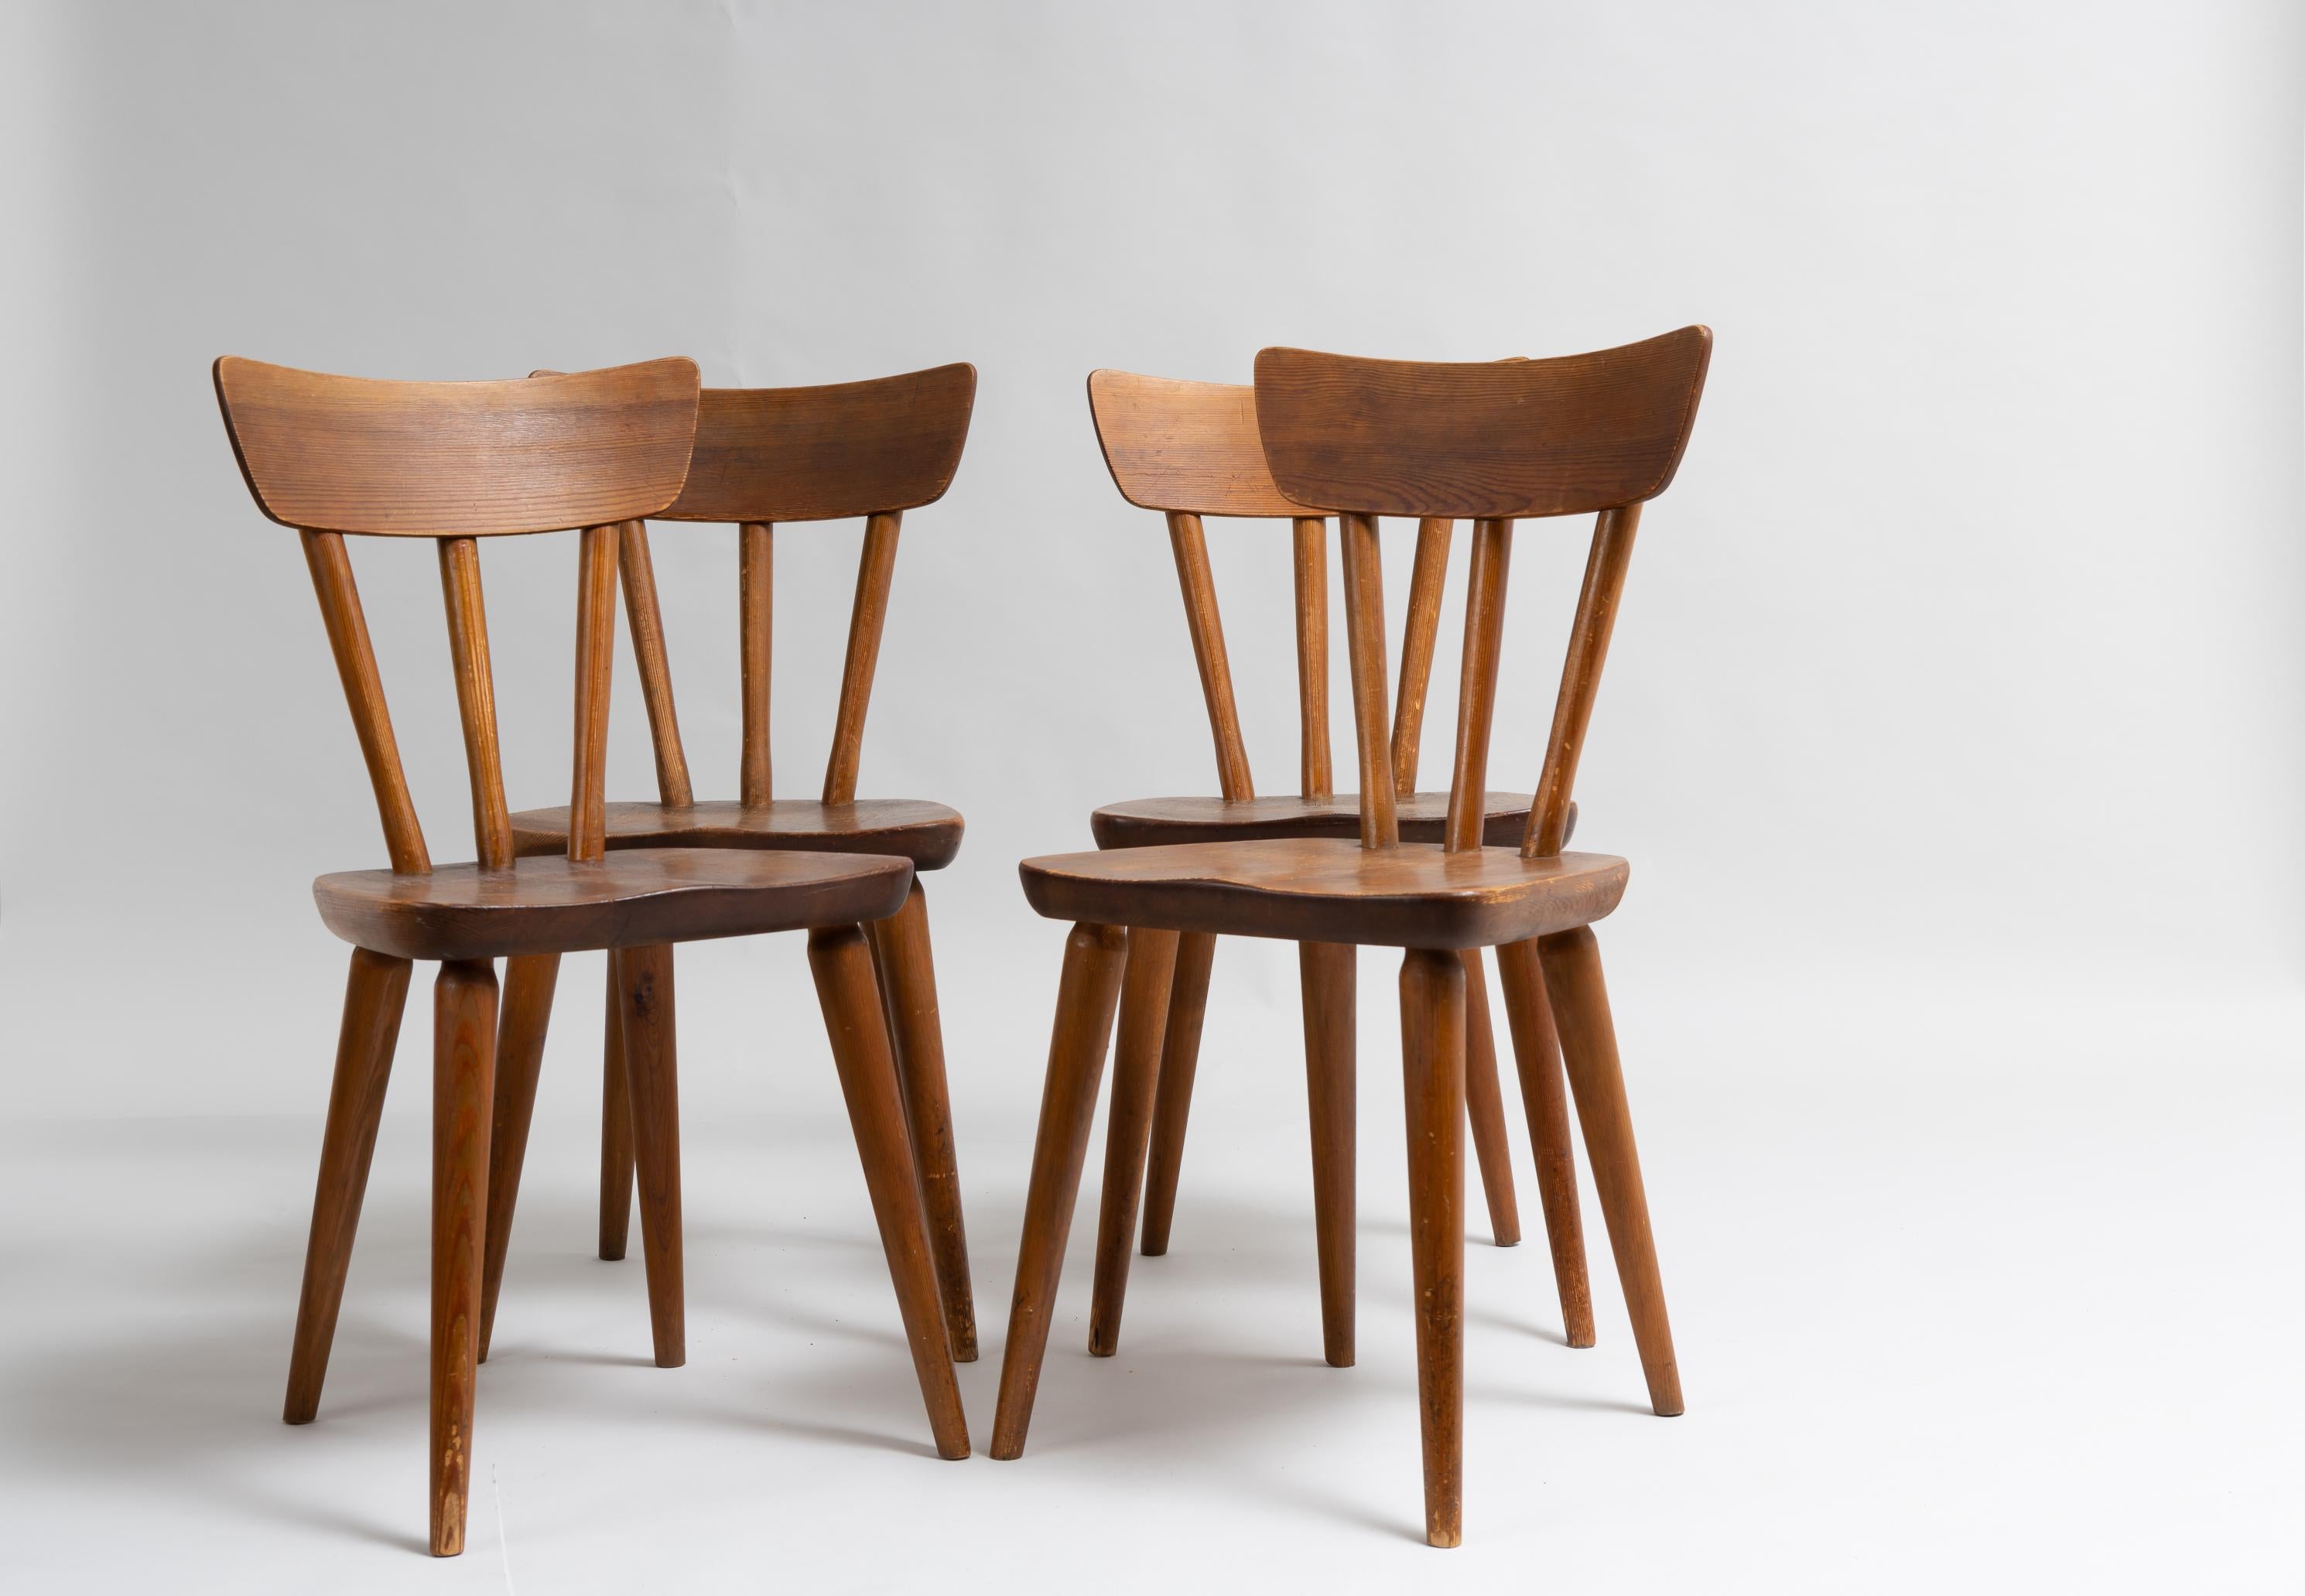 Scandinavian modern set of 4 chairs by Göran Malmvall Svensk Fur, Sweden. The chairs are made in solid Swedish pine around 1950. The chairs follow the Scandinavian modern ideals with the minimalistic design and high functionality combined with an